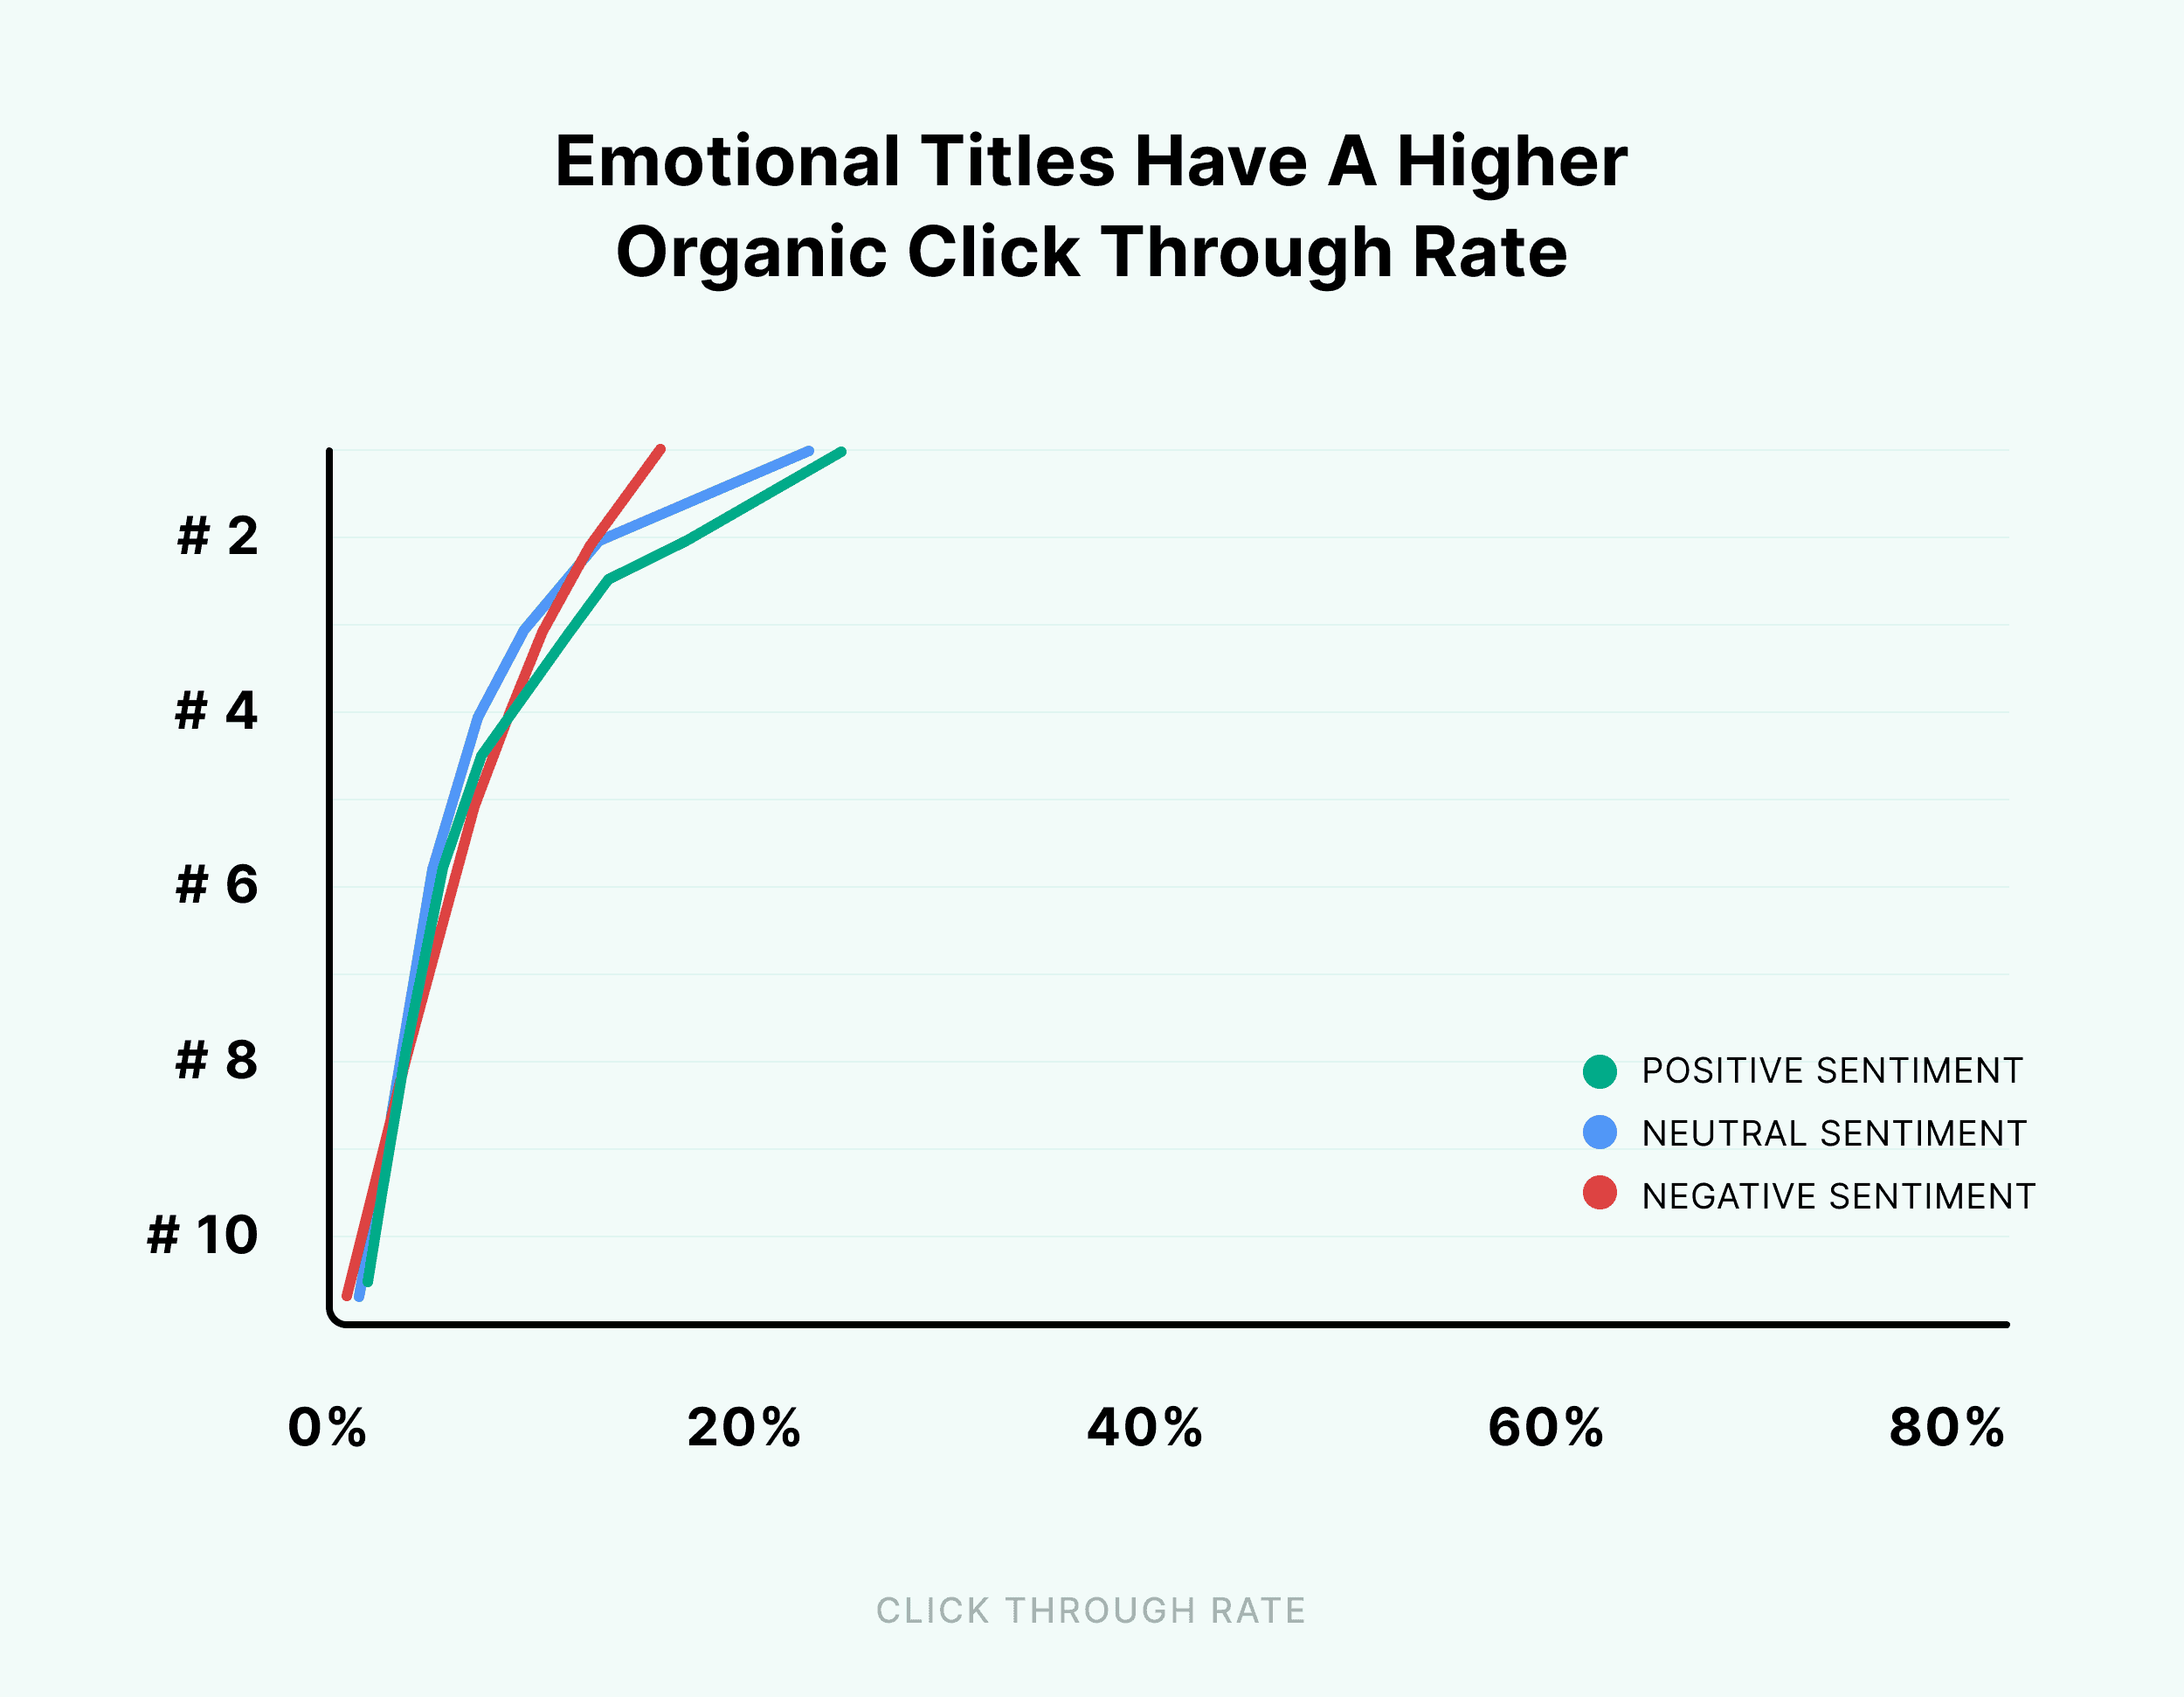 Emotional titles have a higher organic click through rate